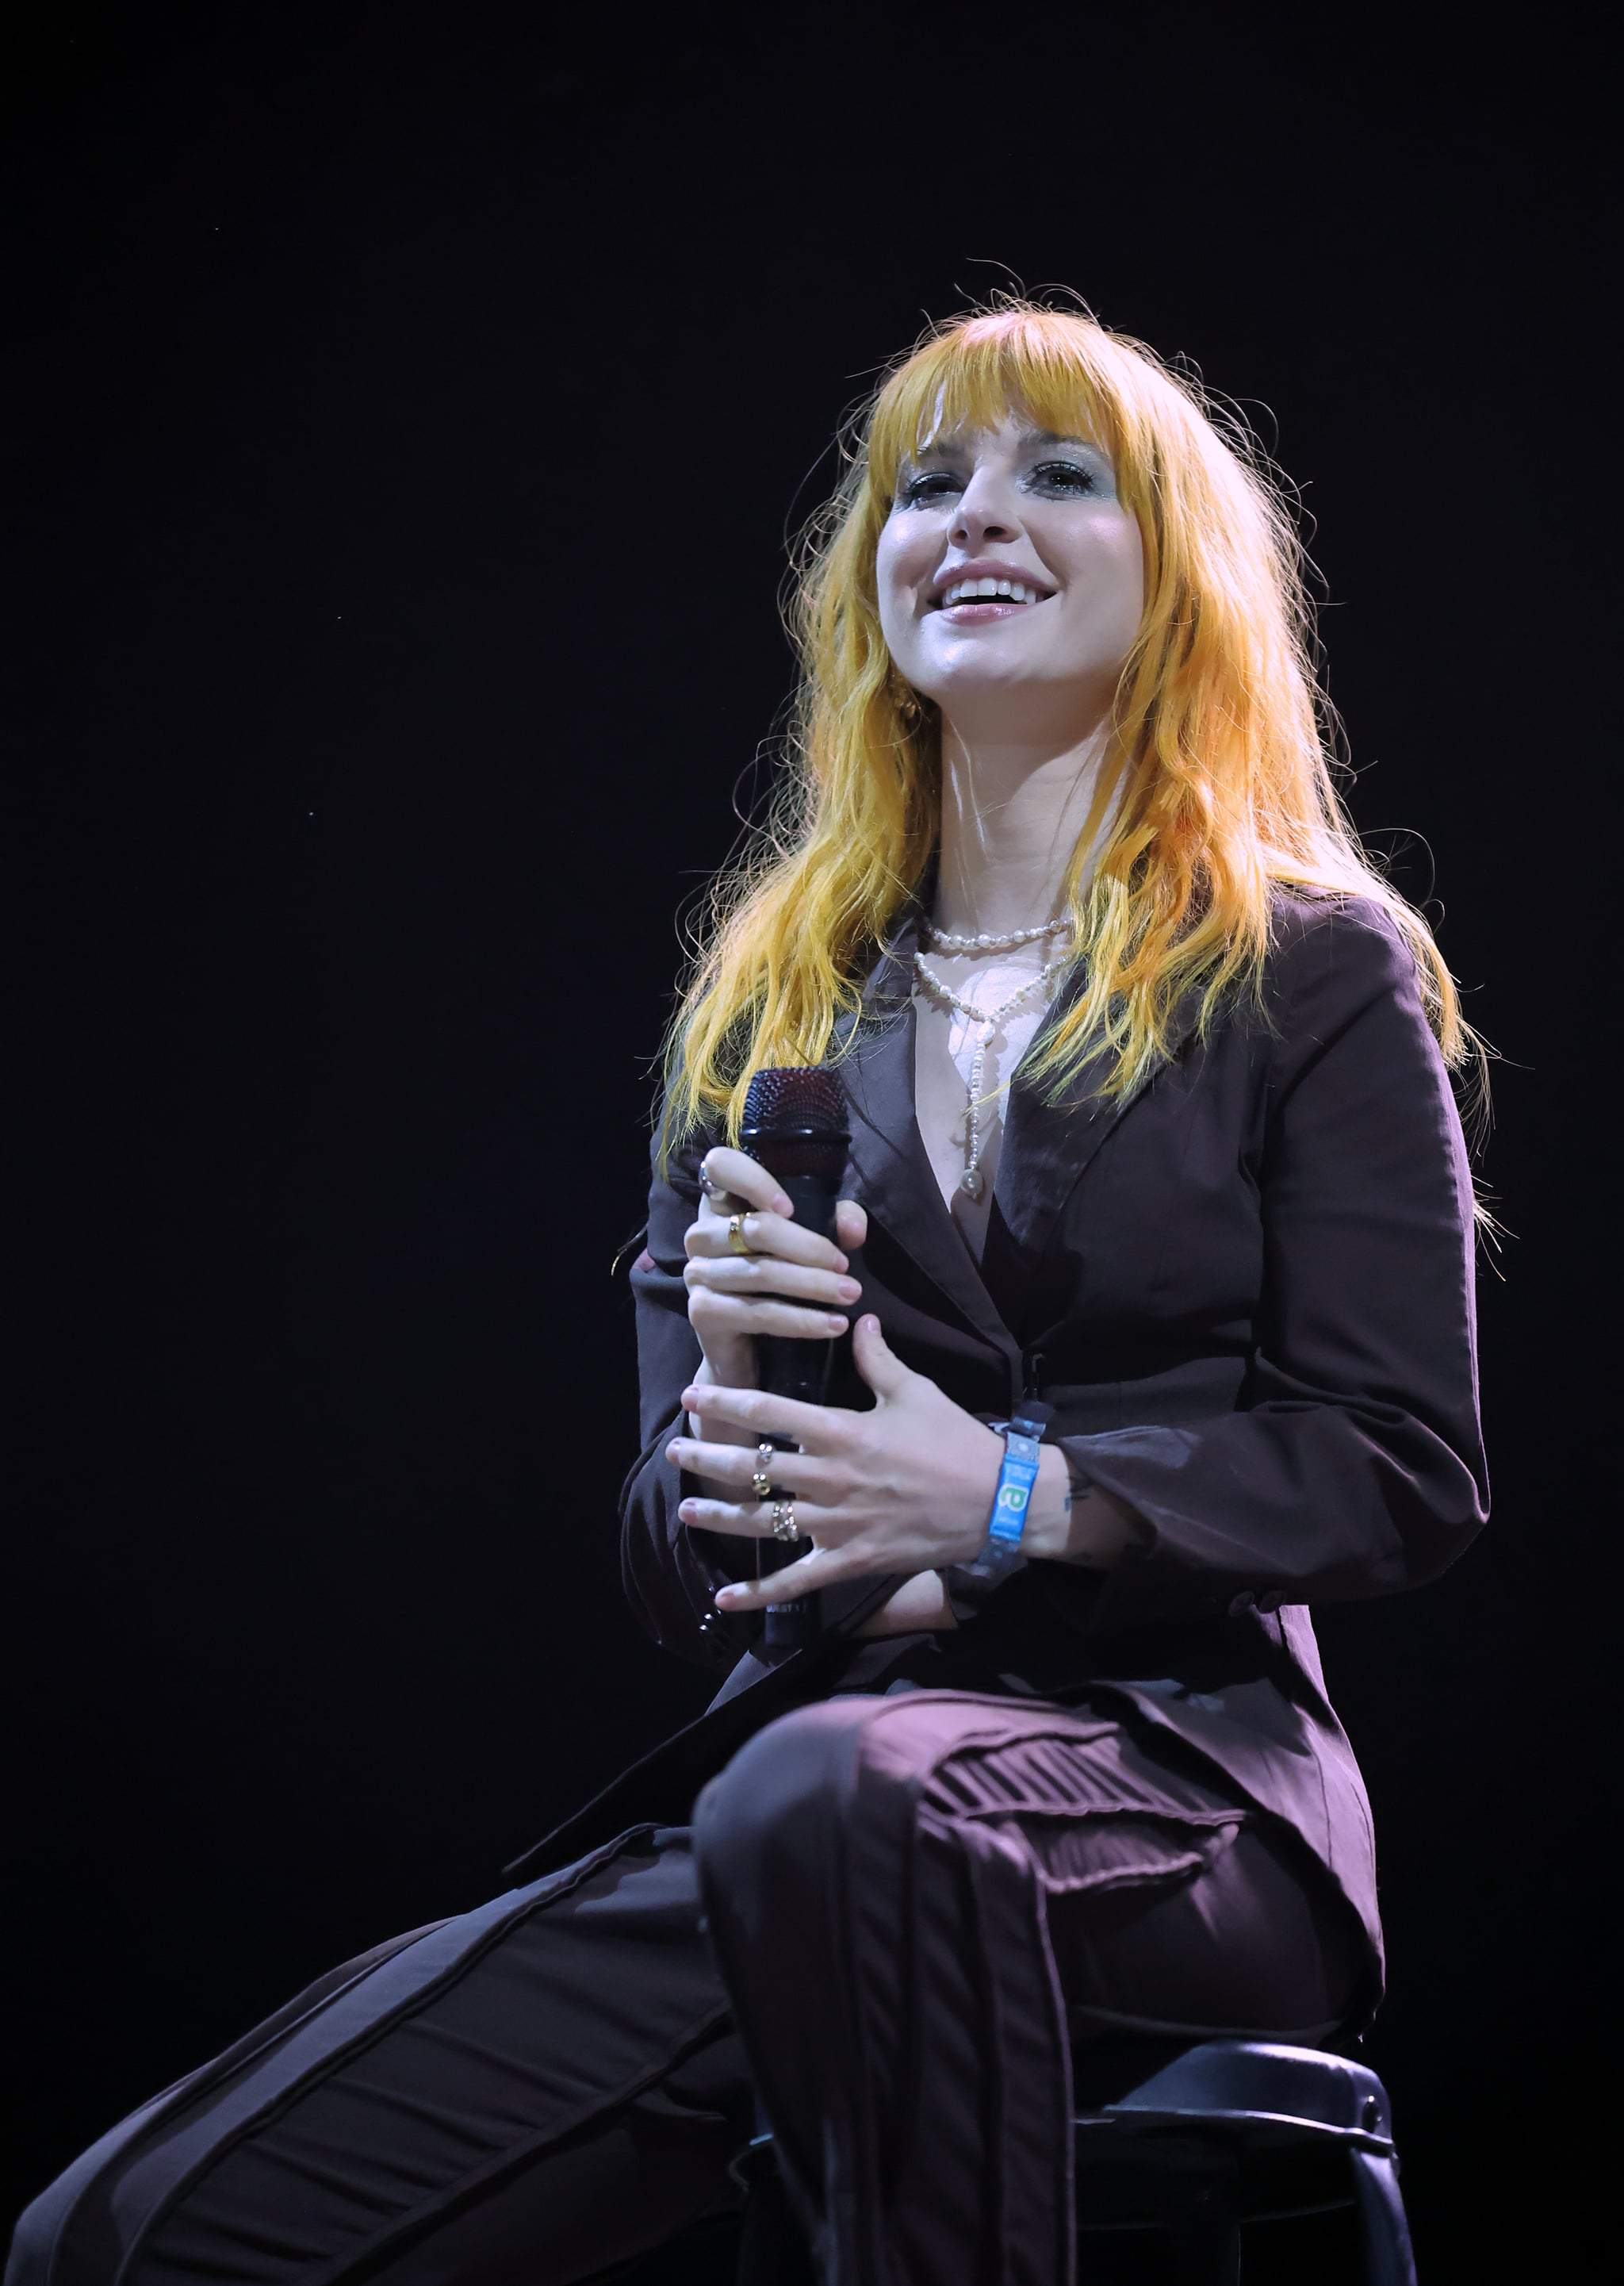 Paramore's Hayley Williams & PinkPantheress Sang “Misery Business” Together  at Austin City Limits